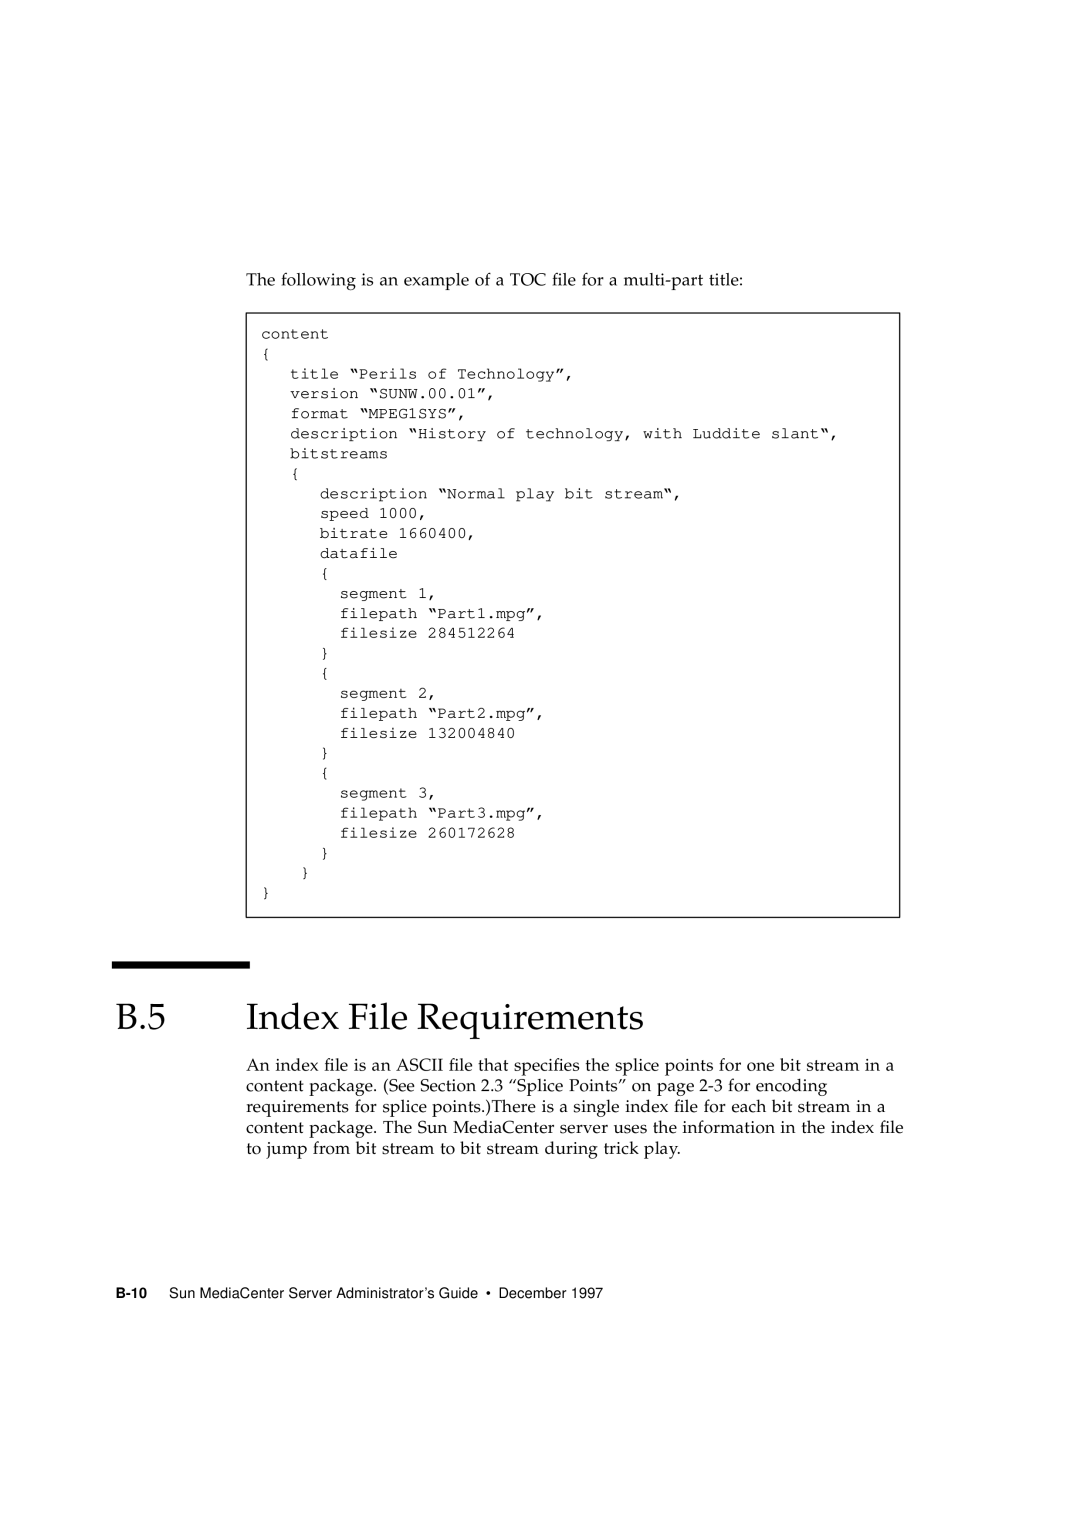 Sun Microsystems 2.1 manual B.5 Index File Requirements 